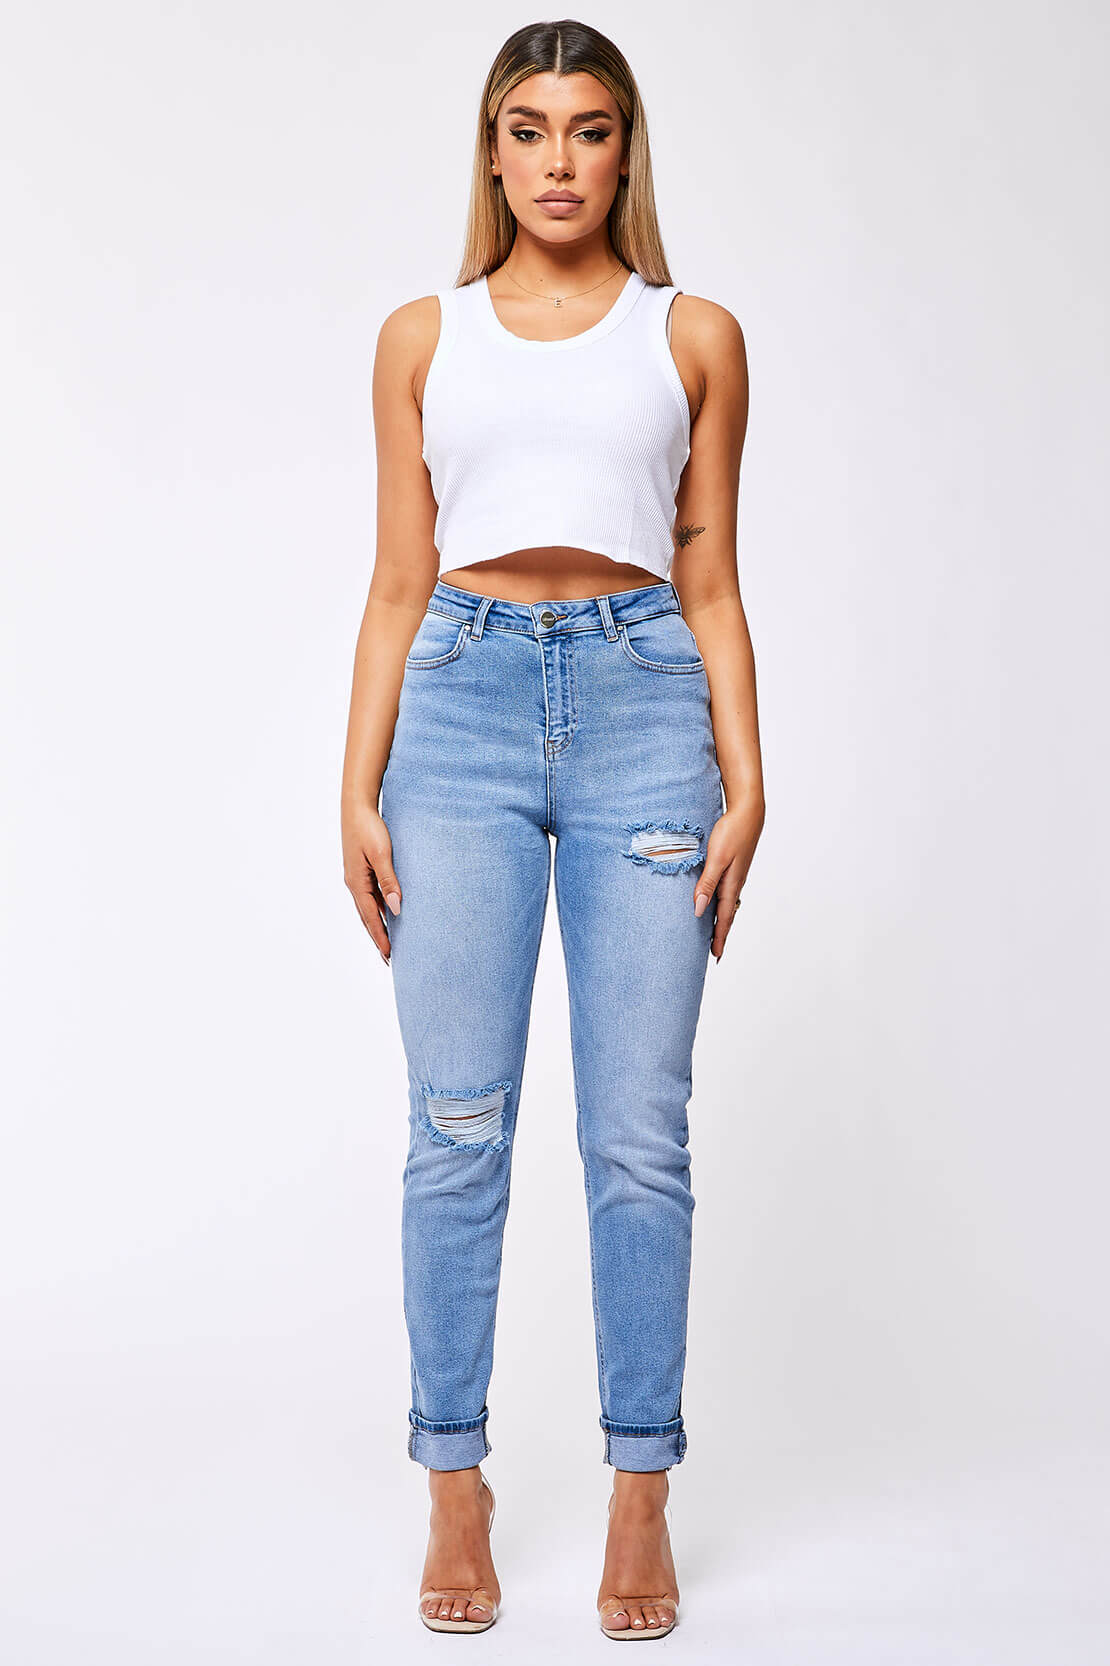 Legend London Womens Jeans STRAIGHT LEG JEAN - WASHED BLUE RIPPED